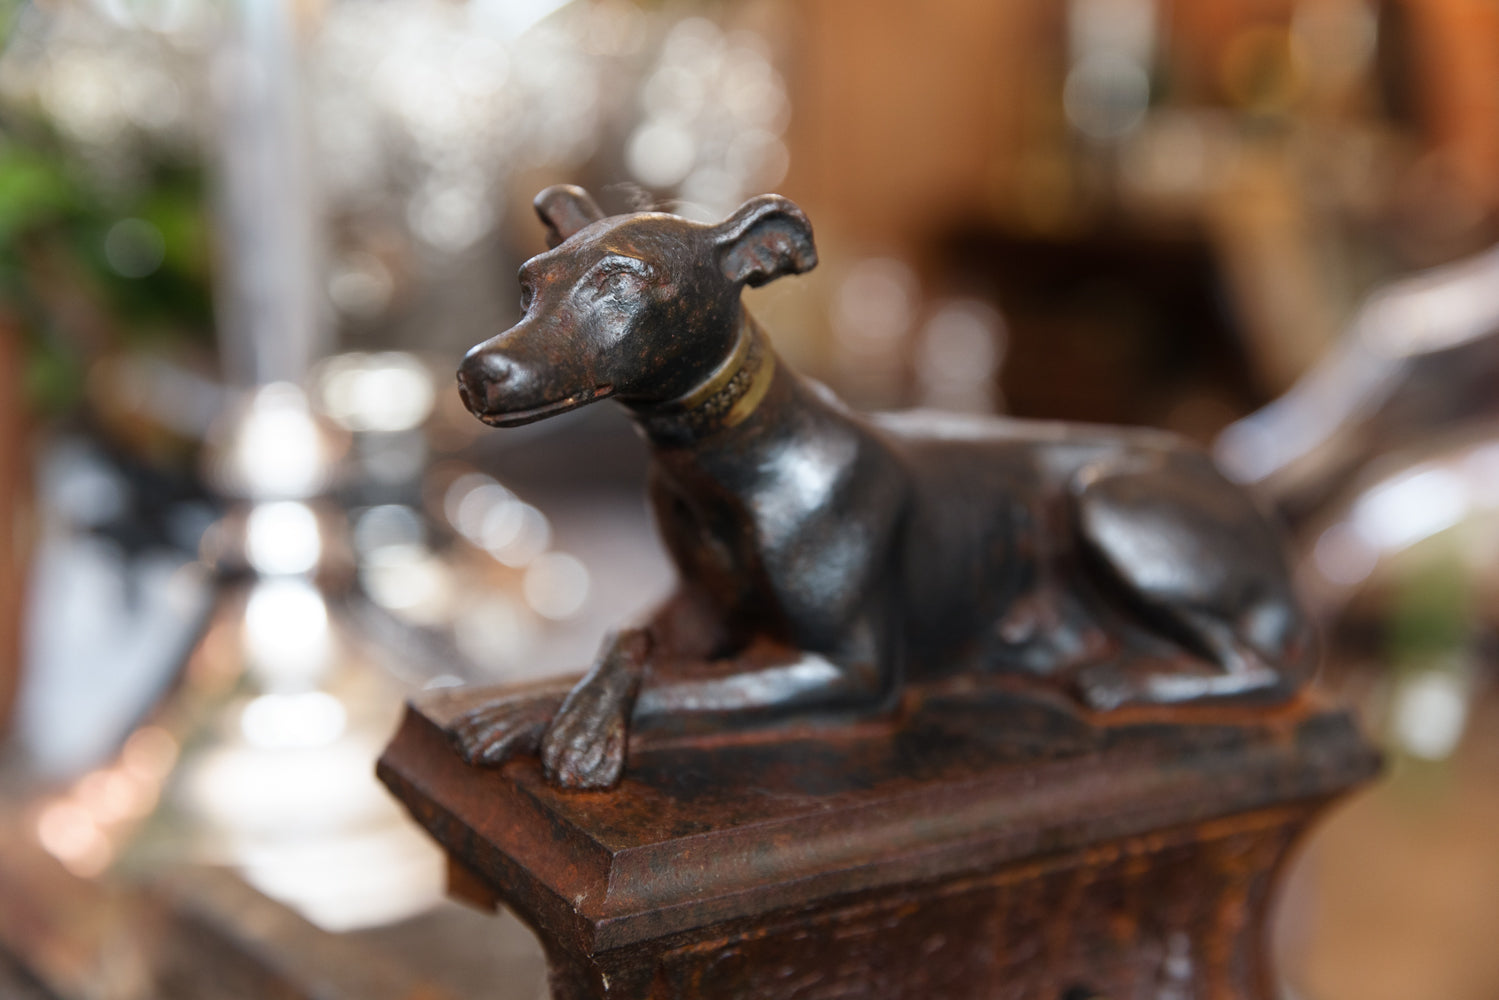 19th Century French Cast Iron & Brass Fire Dogs